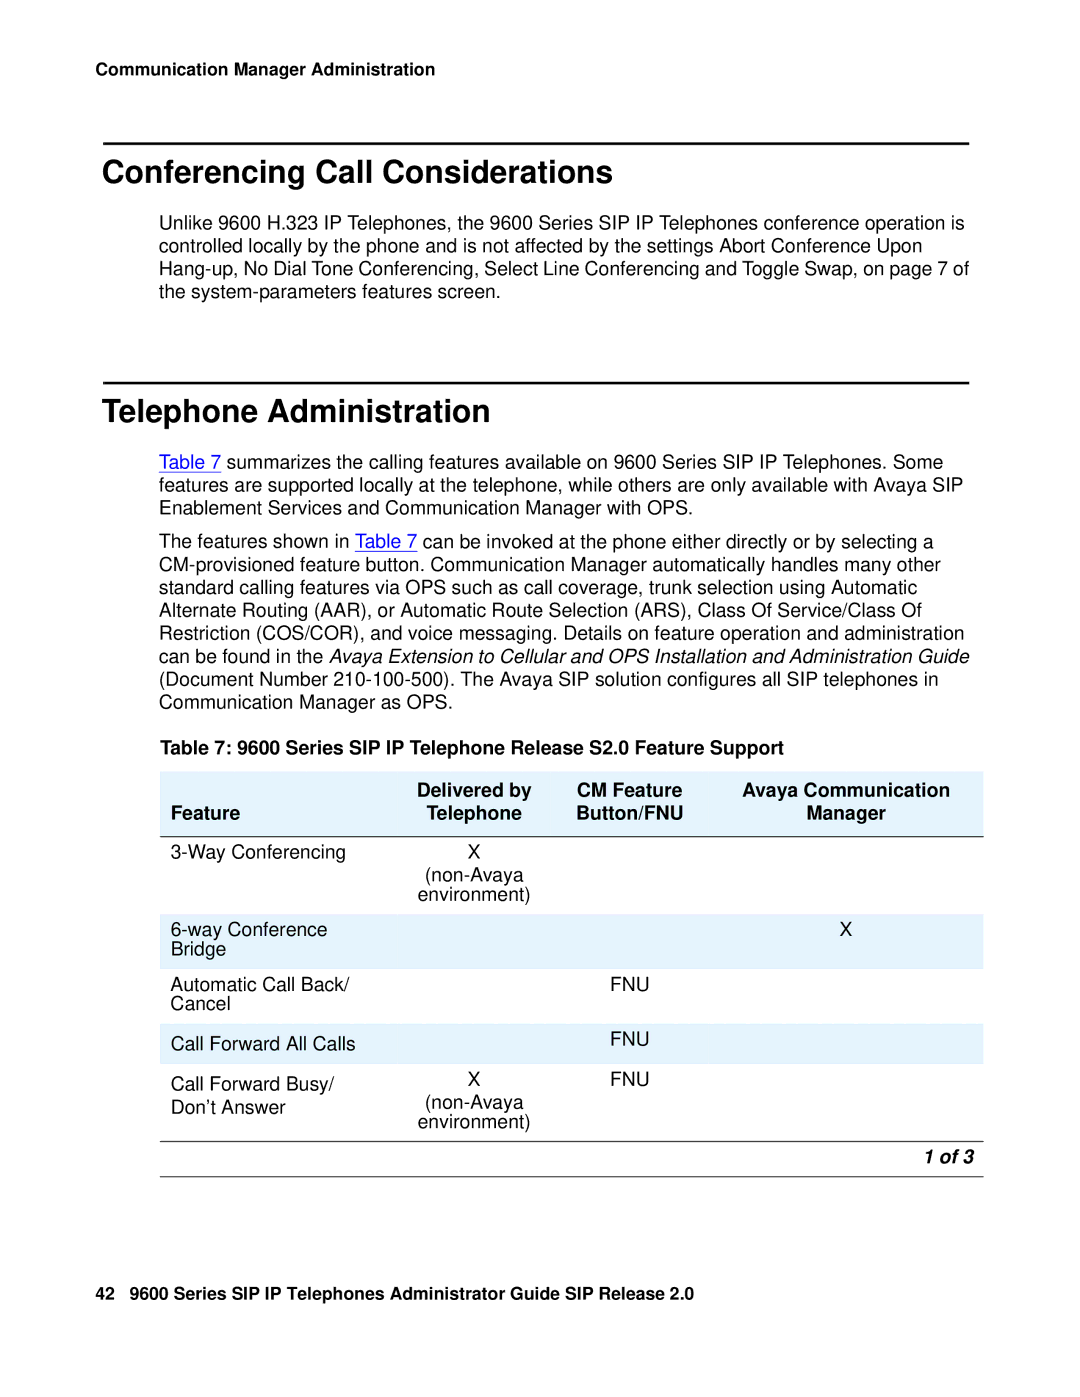 Avaya 9600 manual Conferencing Call Considerations, Telephone Administration, Fnu 